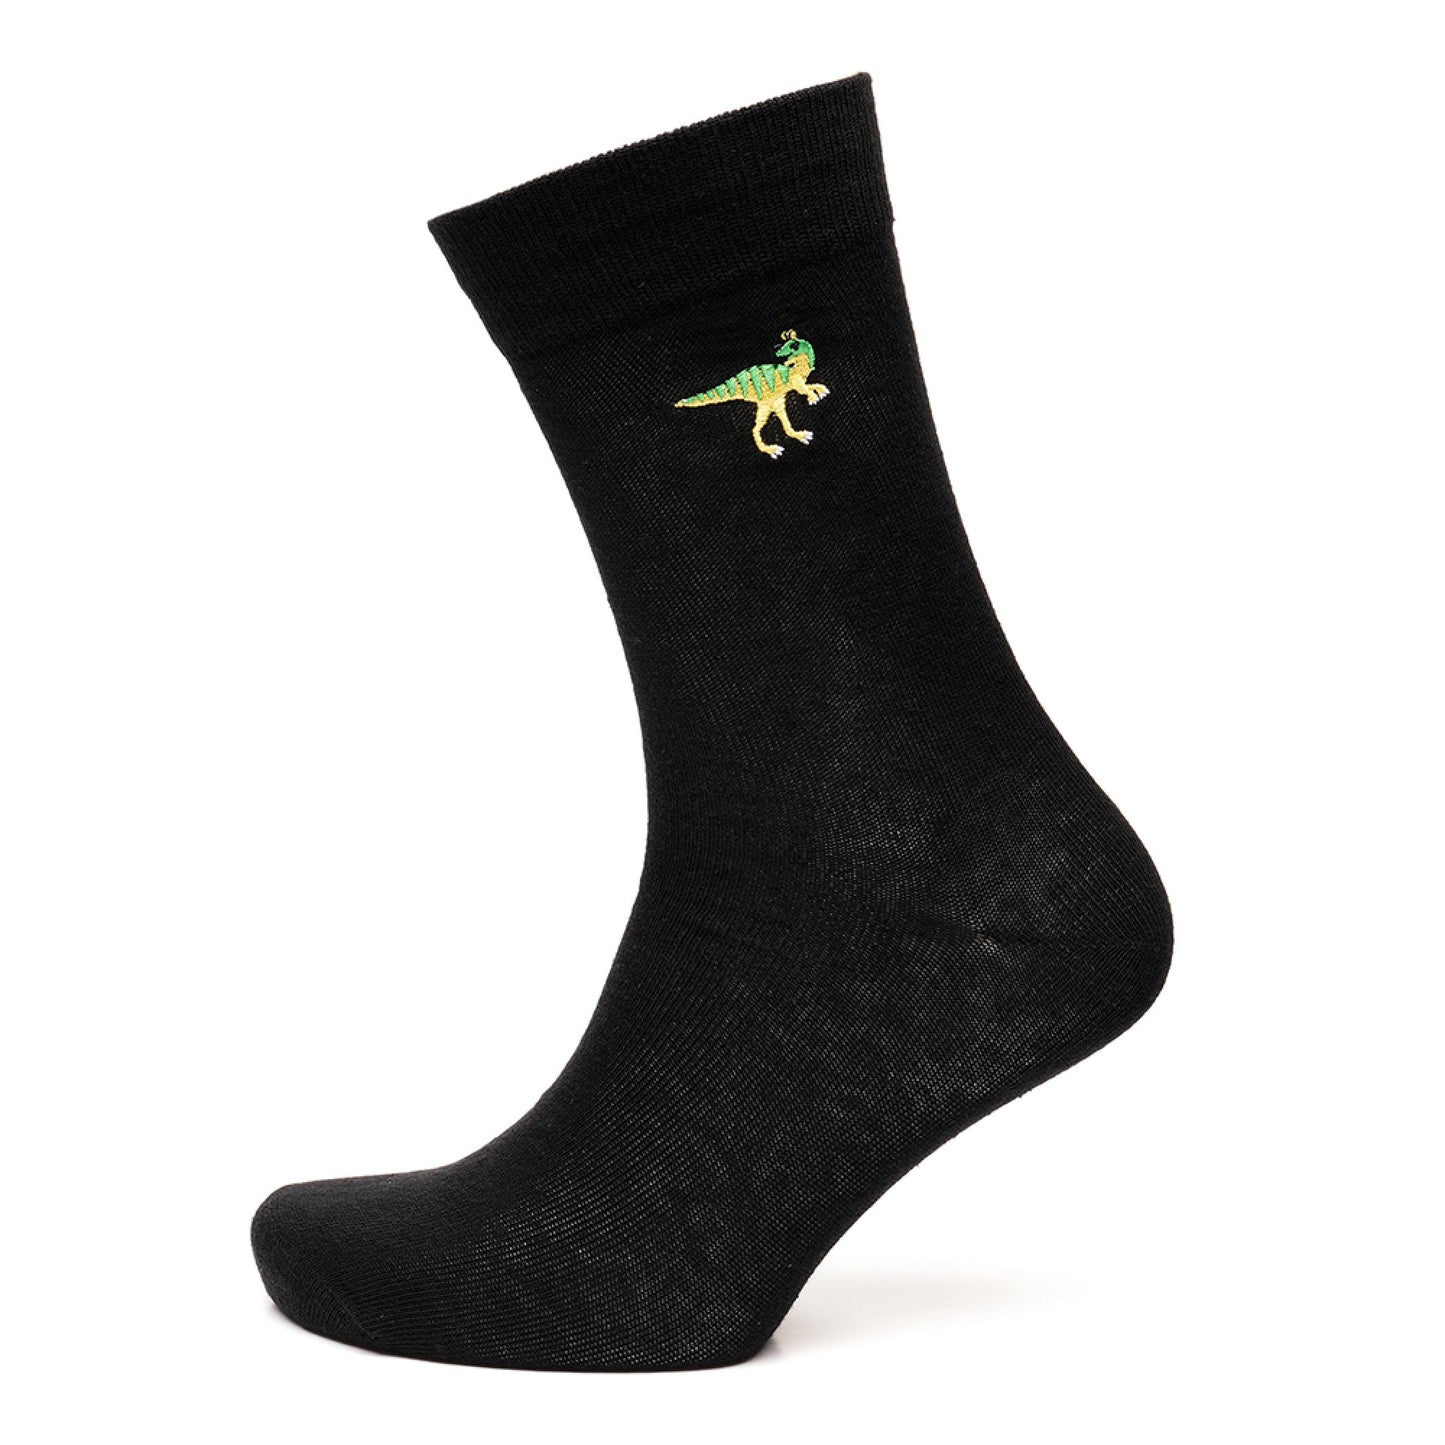 5 Prs Mens Black Cotton Rich Calf Length Socks with Embroidery - Dinosaur or Football